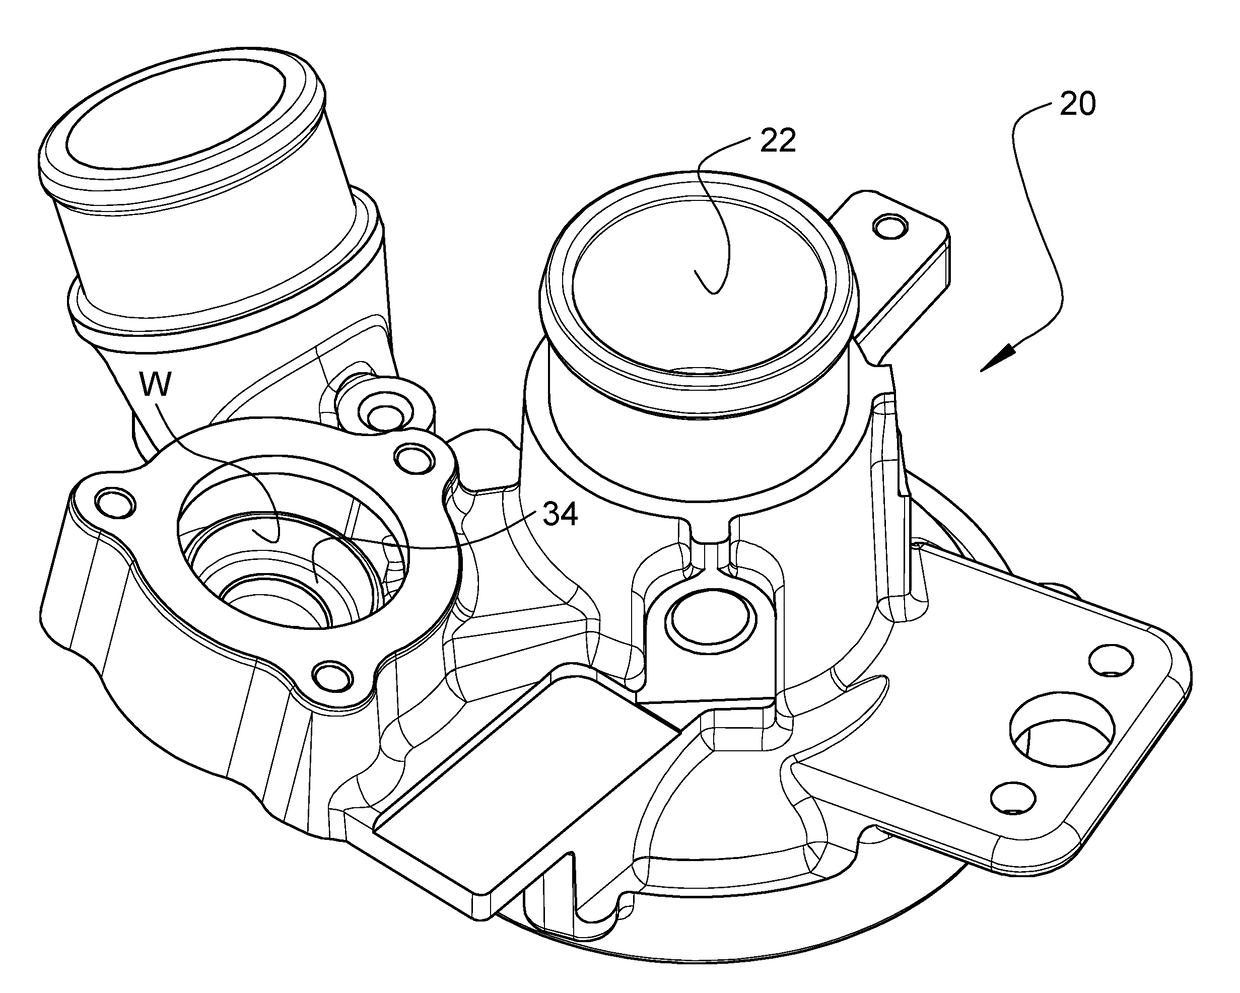 Compressor recirculation valve with valve seat structure for suppressing noise upon opening of valve